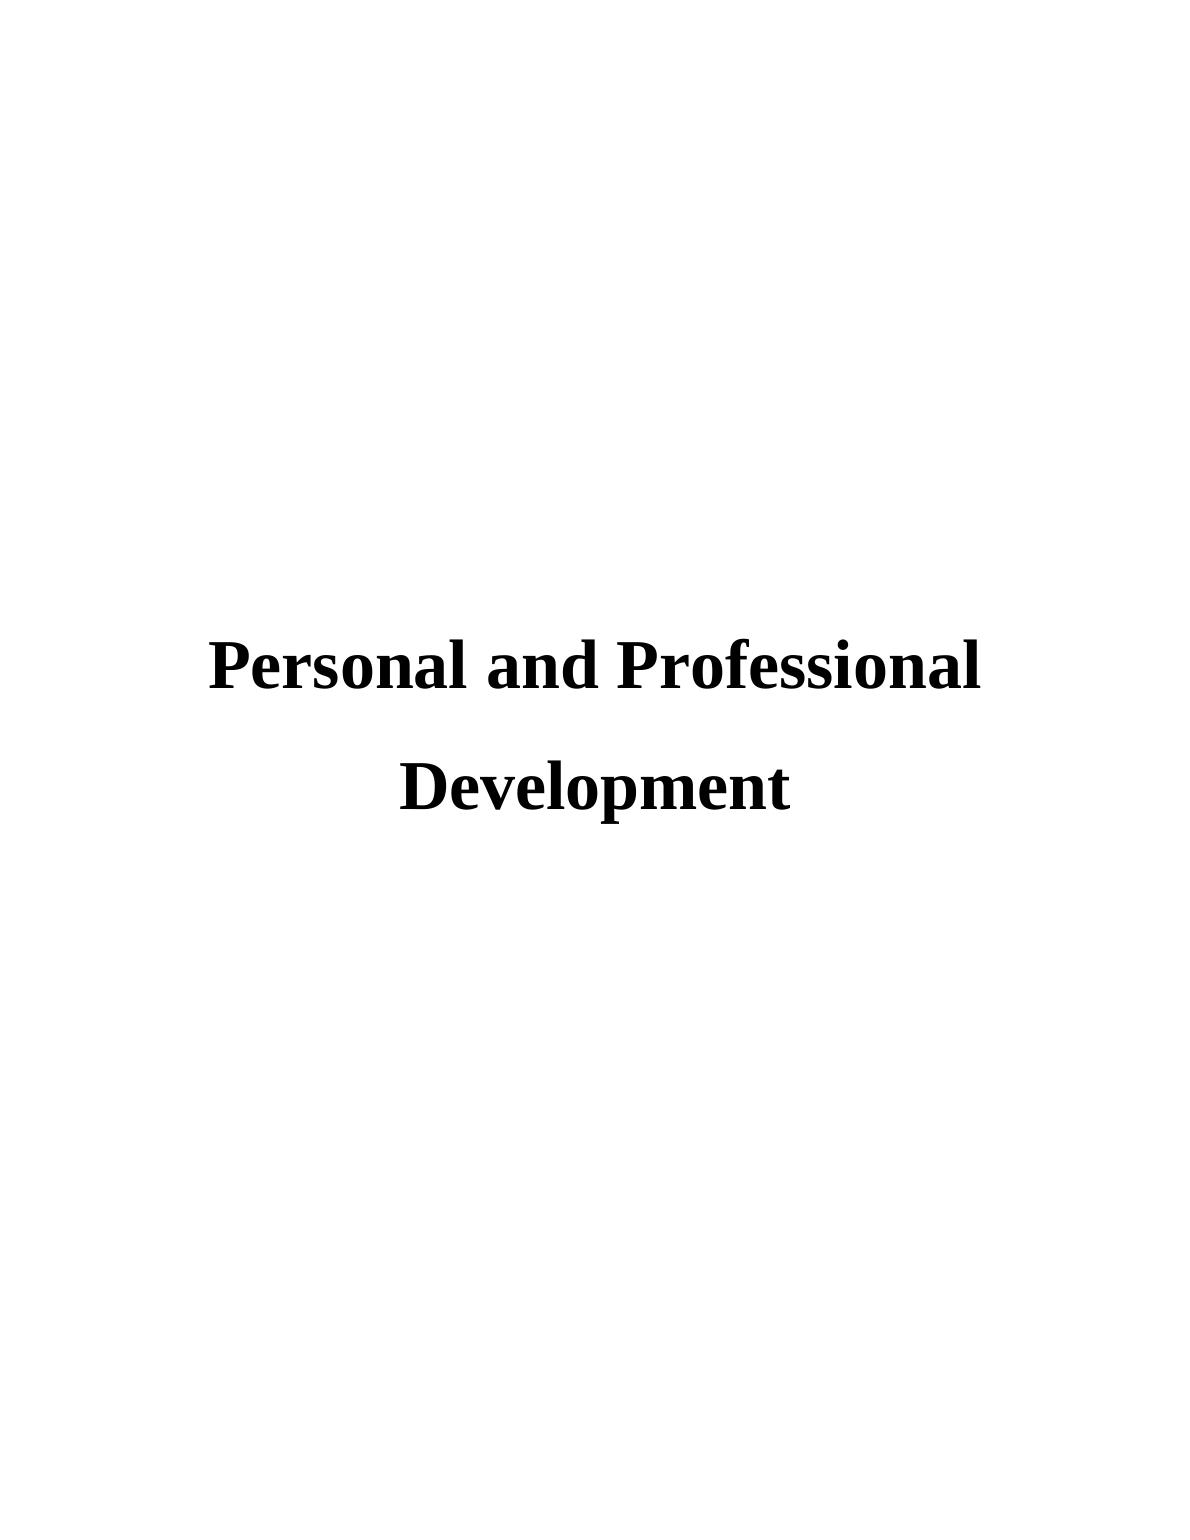 Personal and Professional Development in Sainsbury : Report_1